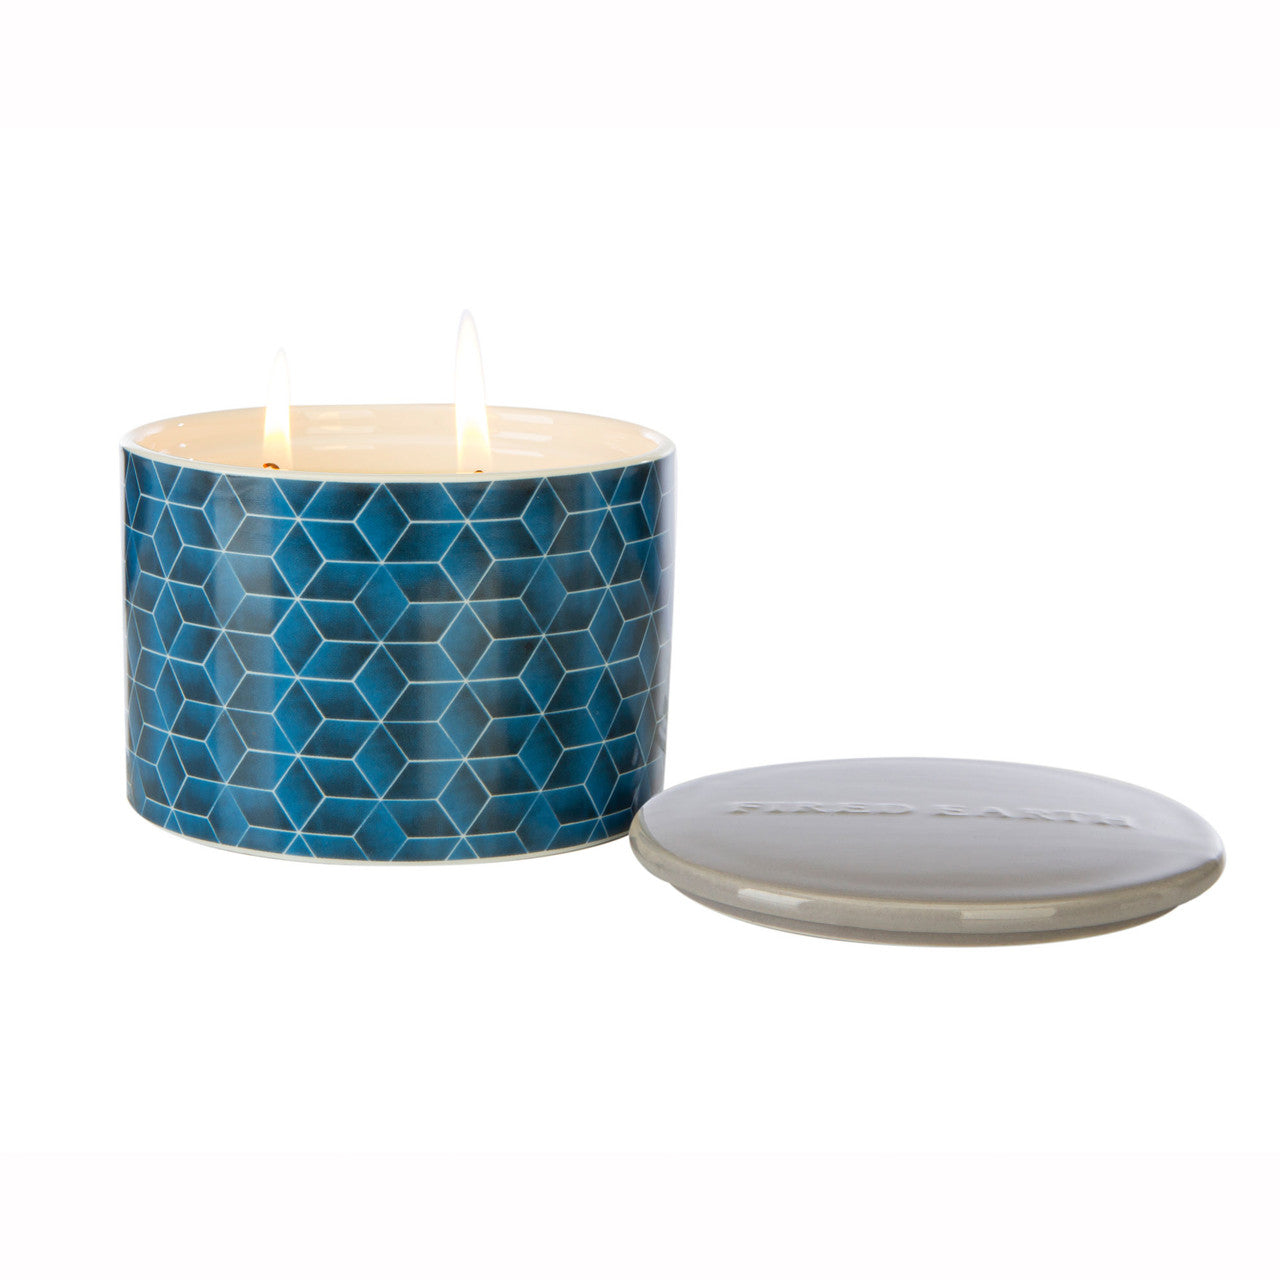 Fired Earth Ceramic Multi Wick Assam & White Cedar Candle by Wax Lyrical. Made in the UK.